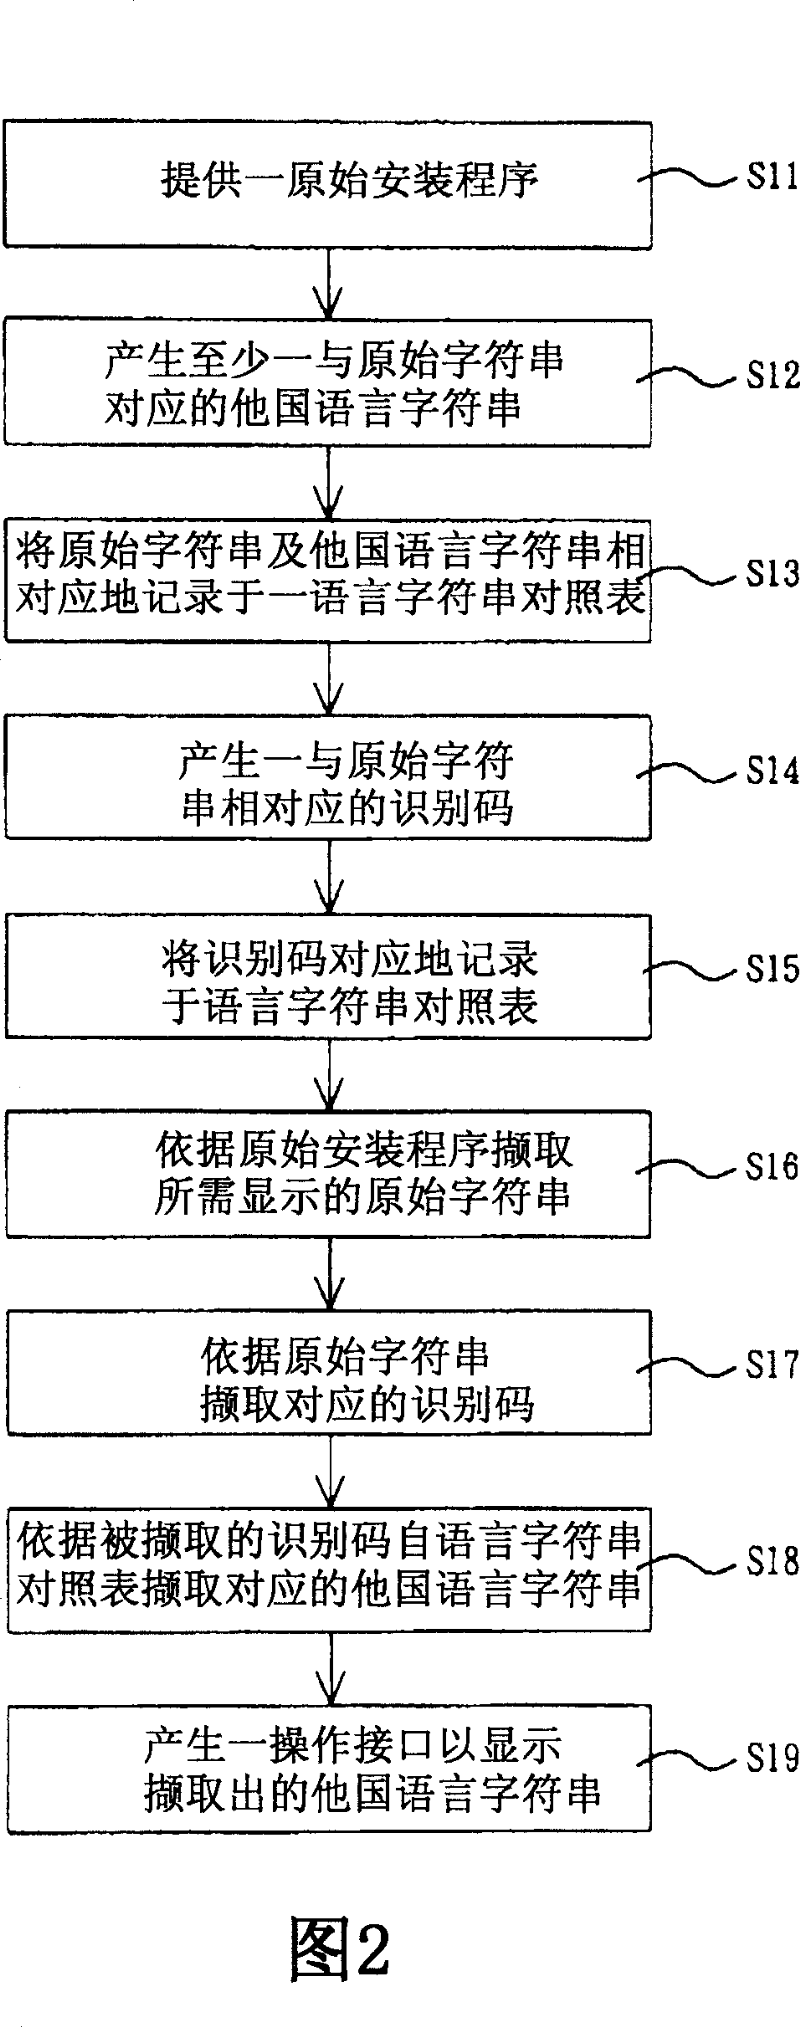 Method and system for mounting multi-national language program